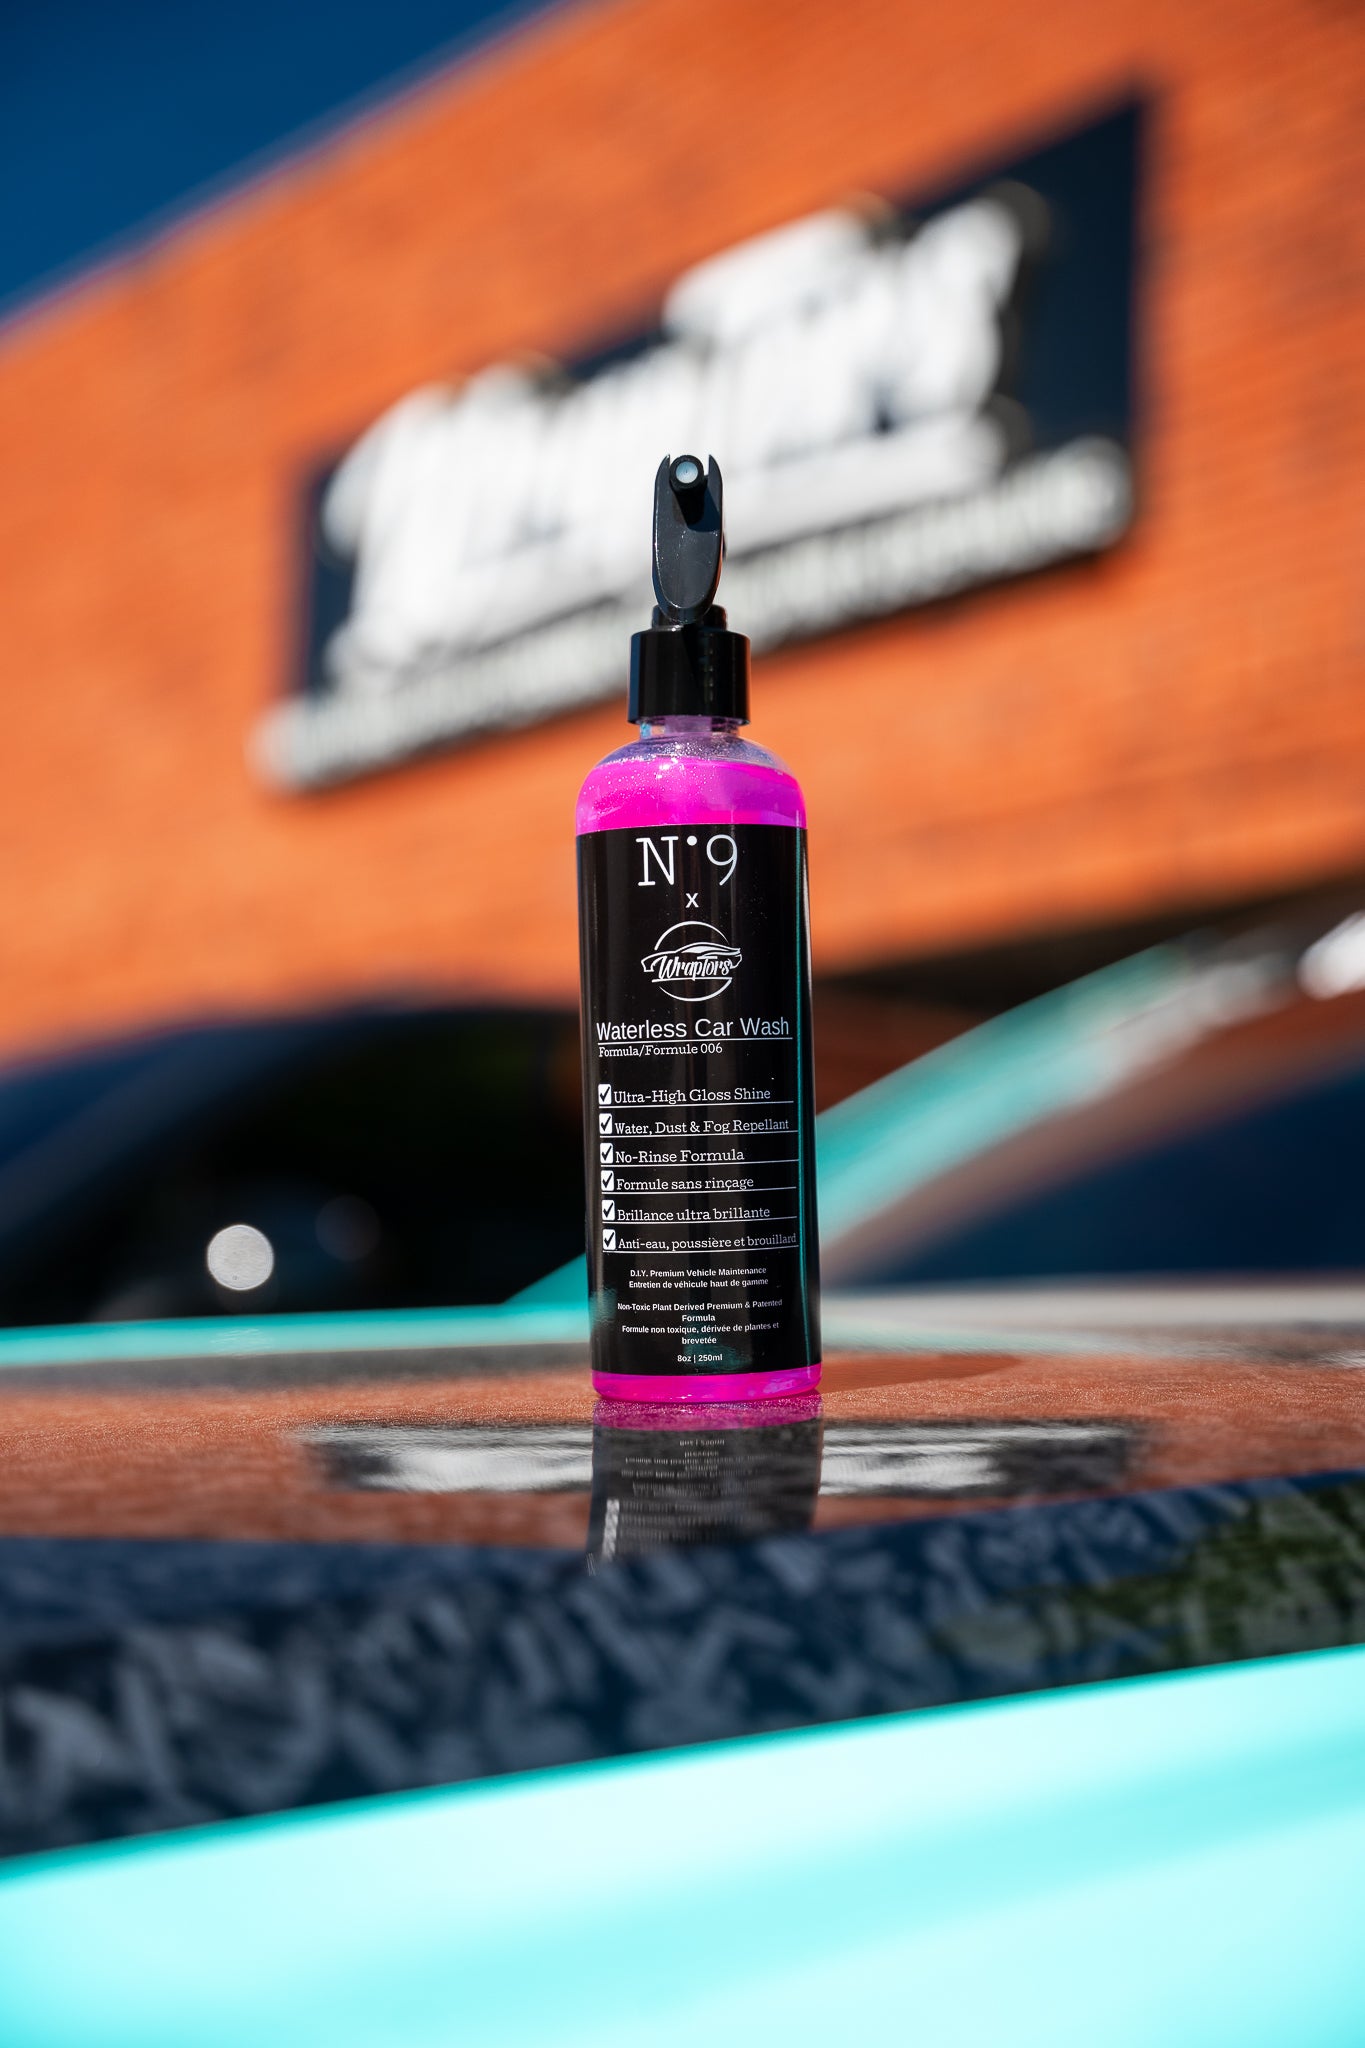 Wraptors x N9 Waterless Car Wash Detail Spray &amp; Wax, Mirror-Like Gloss Guaranteed, Scratch-Free, Water &amp; Fog Repellent Top Coat, Ultra Slick Car Polisher No Garden Hose or Foam Cannon Needed